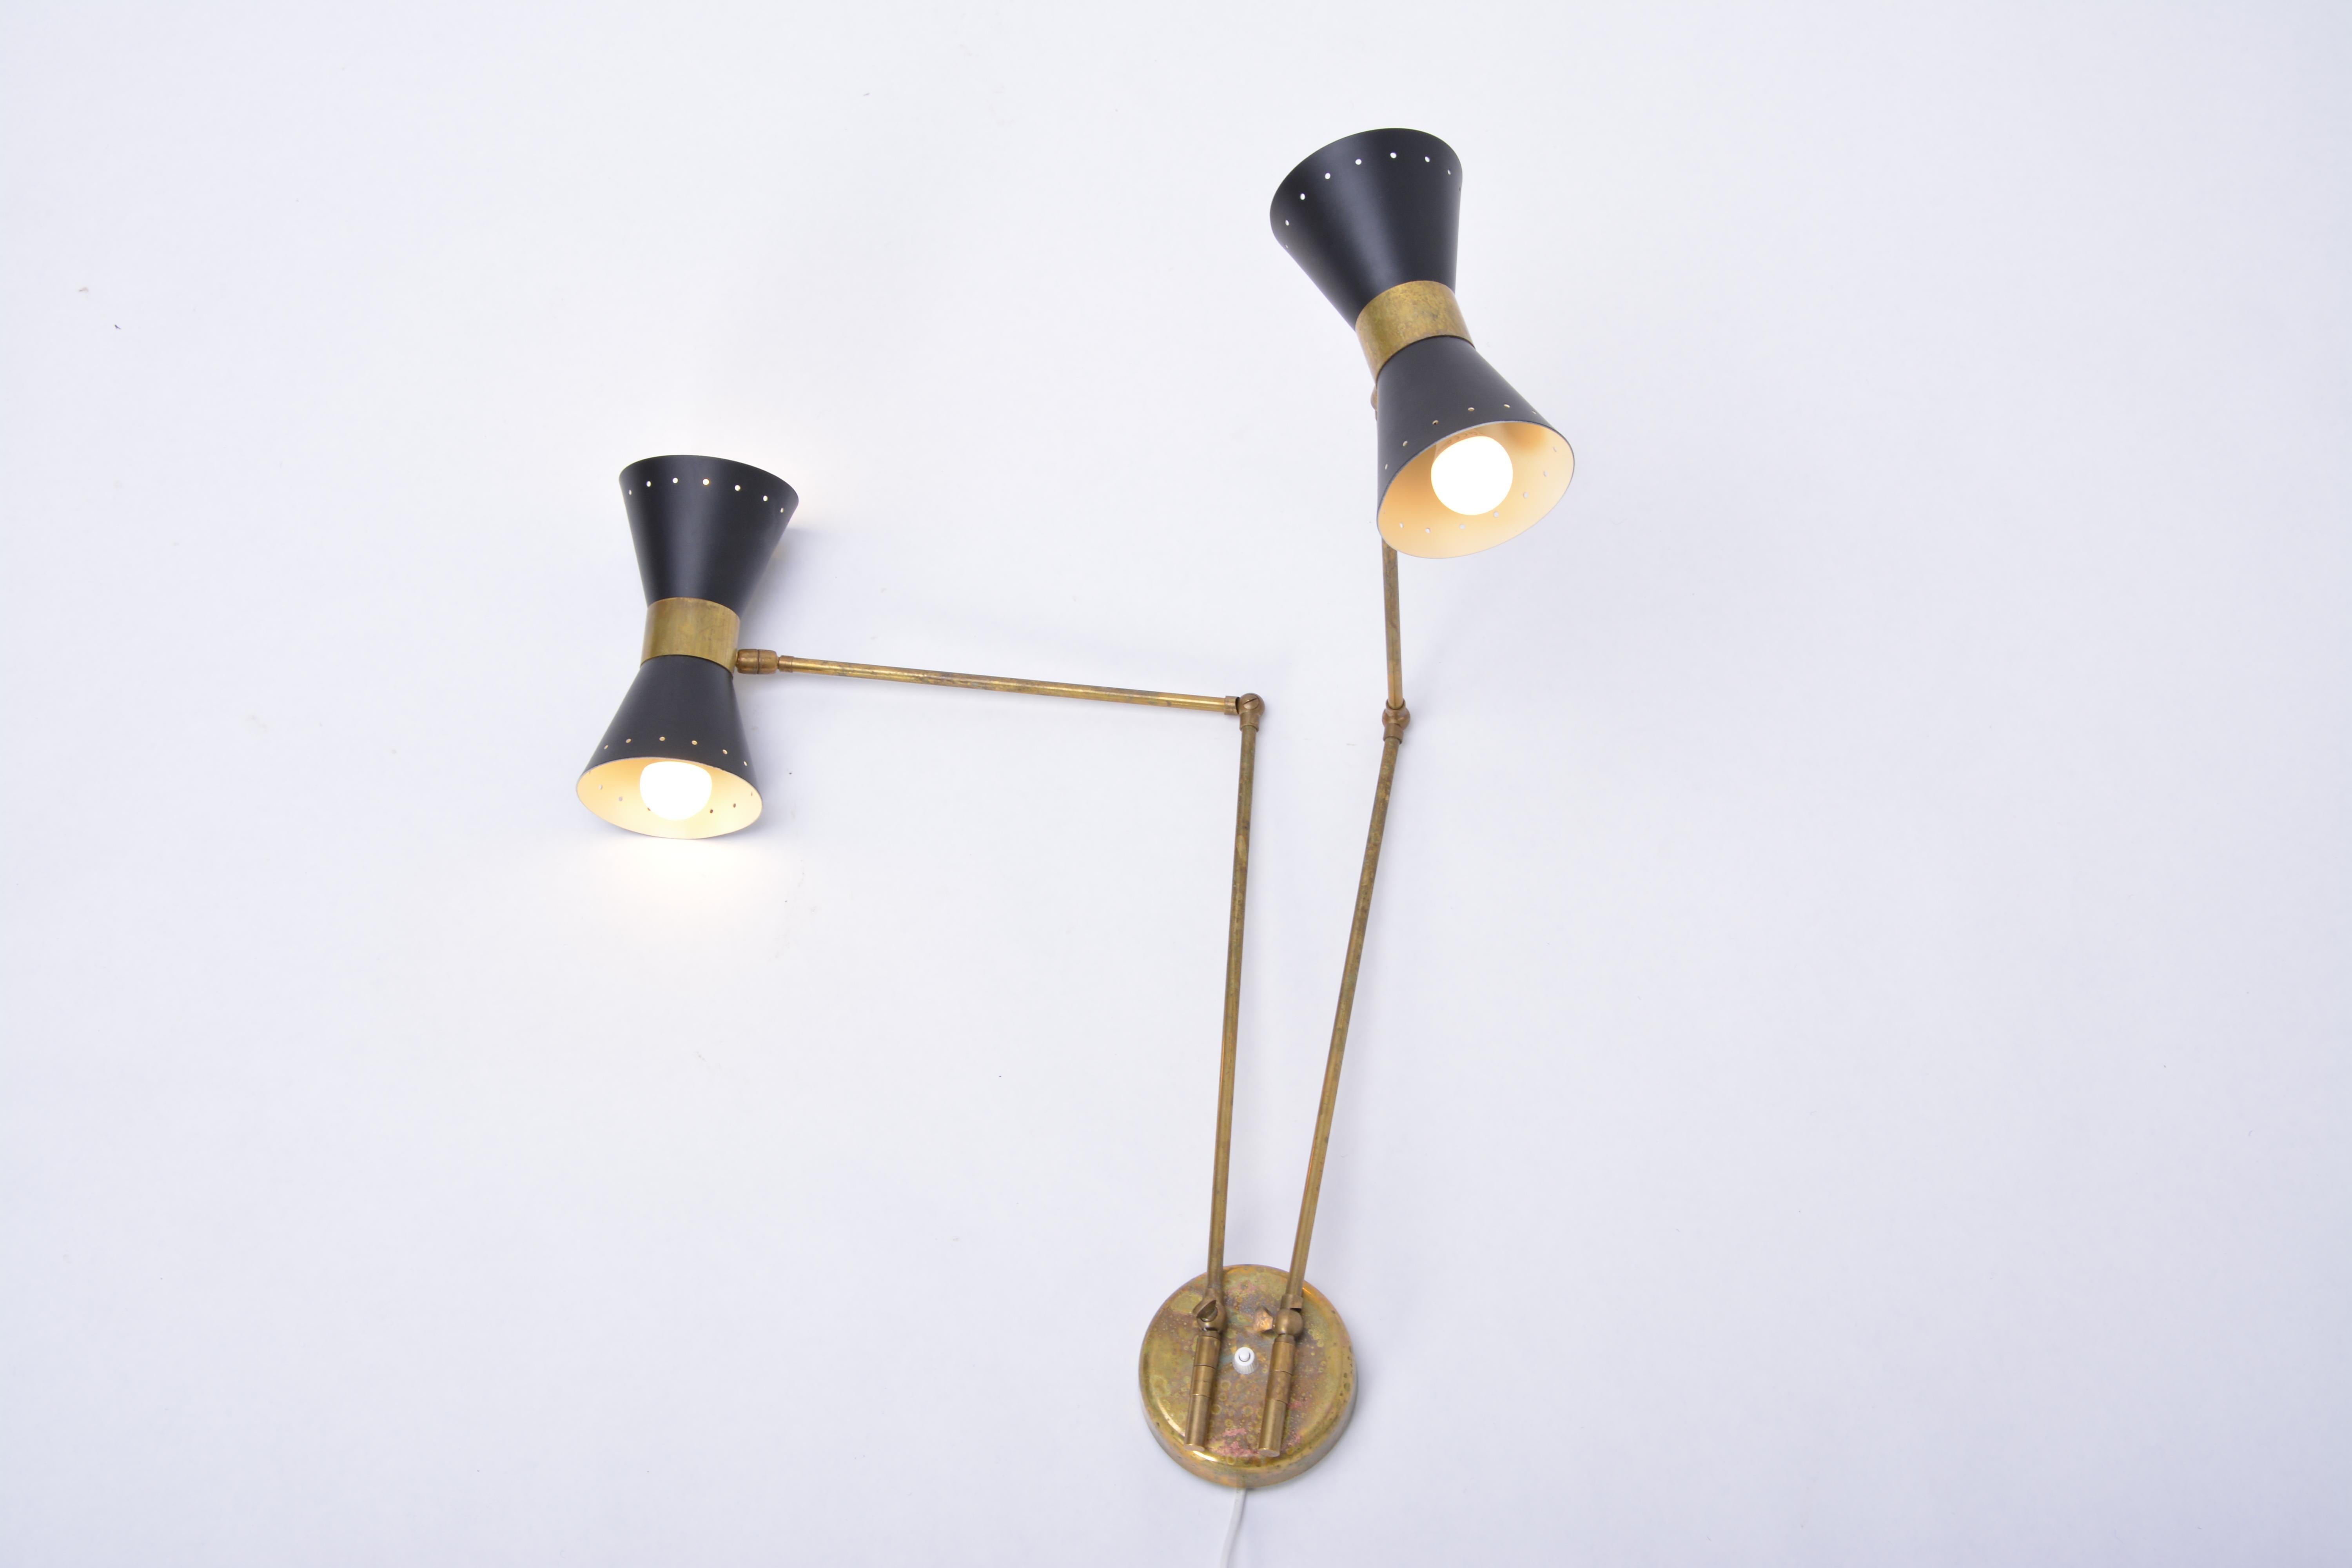 - Italian wall light with brass elements
- Fully adjustable and rotatable
- Each arm has a light for two E14 bulbs
- This lets it light in both directions, up and down
- Each arm measures 80 cm in length
- No dents, rewired, and ready to use.